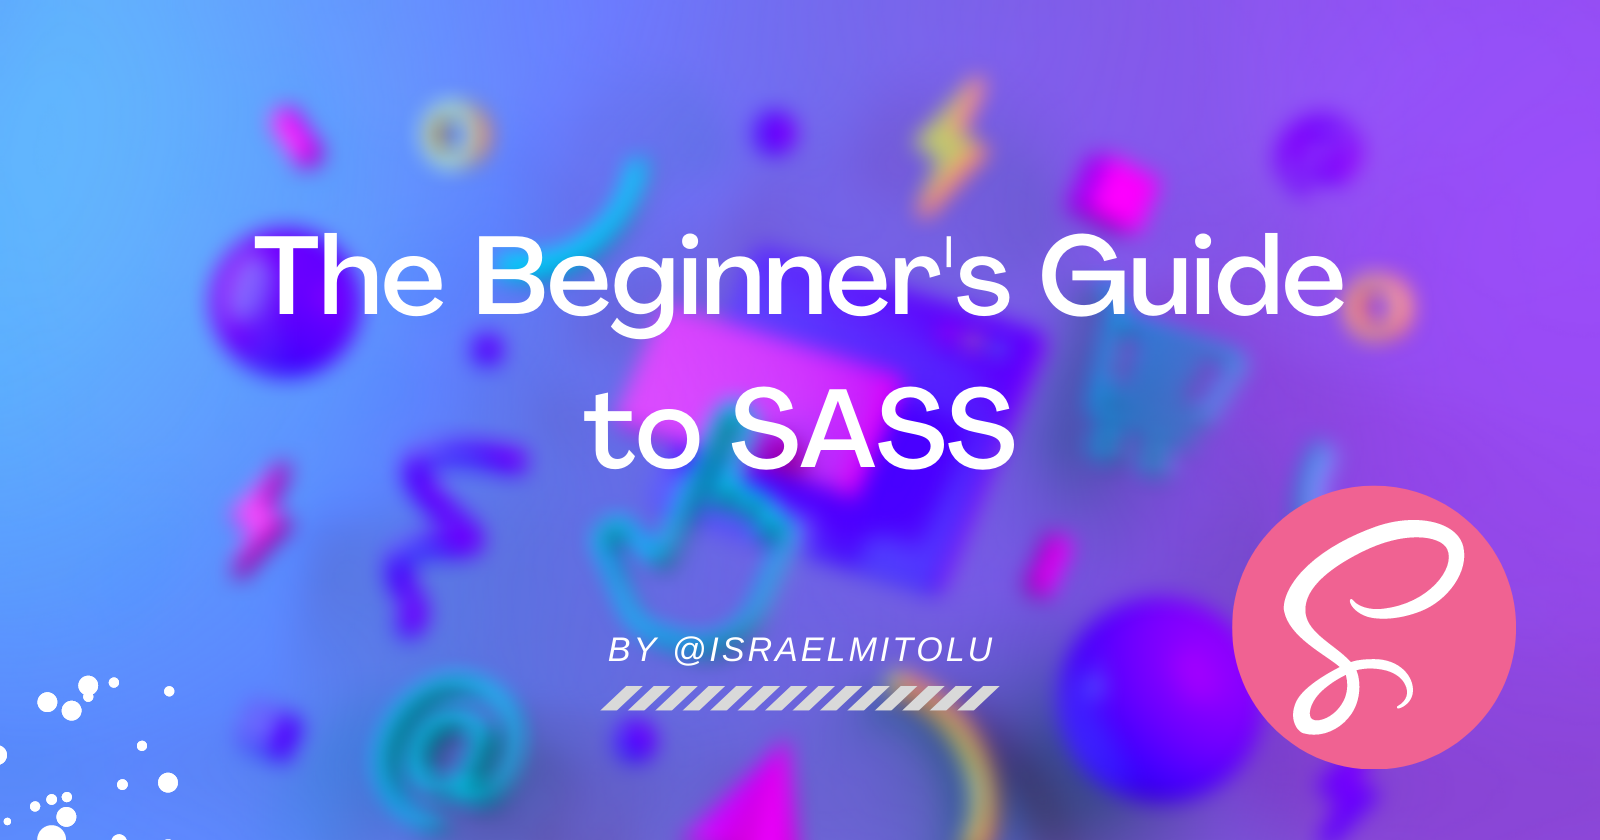 The Beginner's Guide to Sass